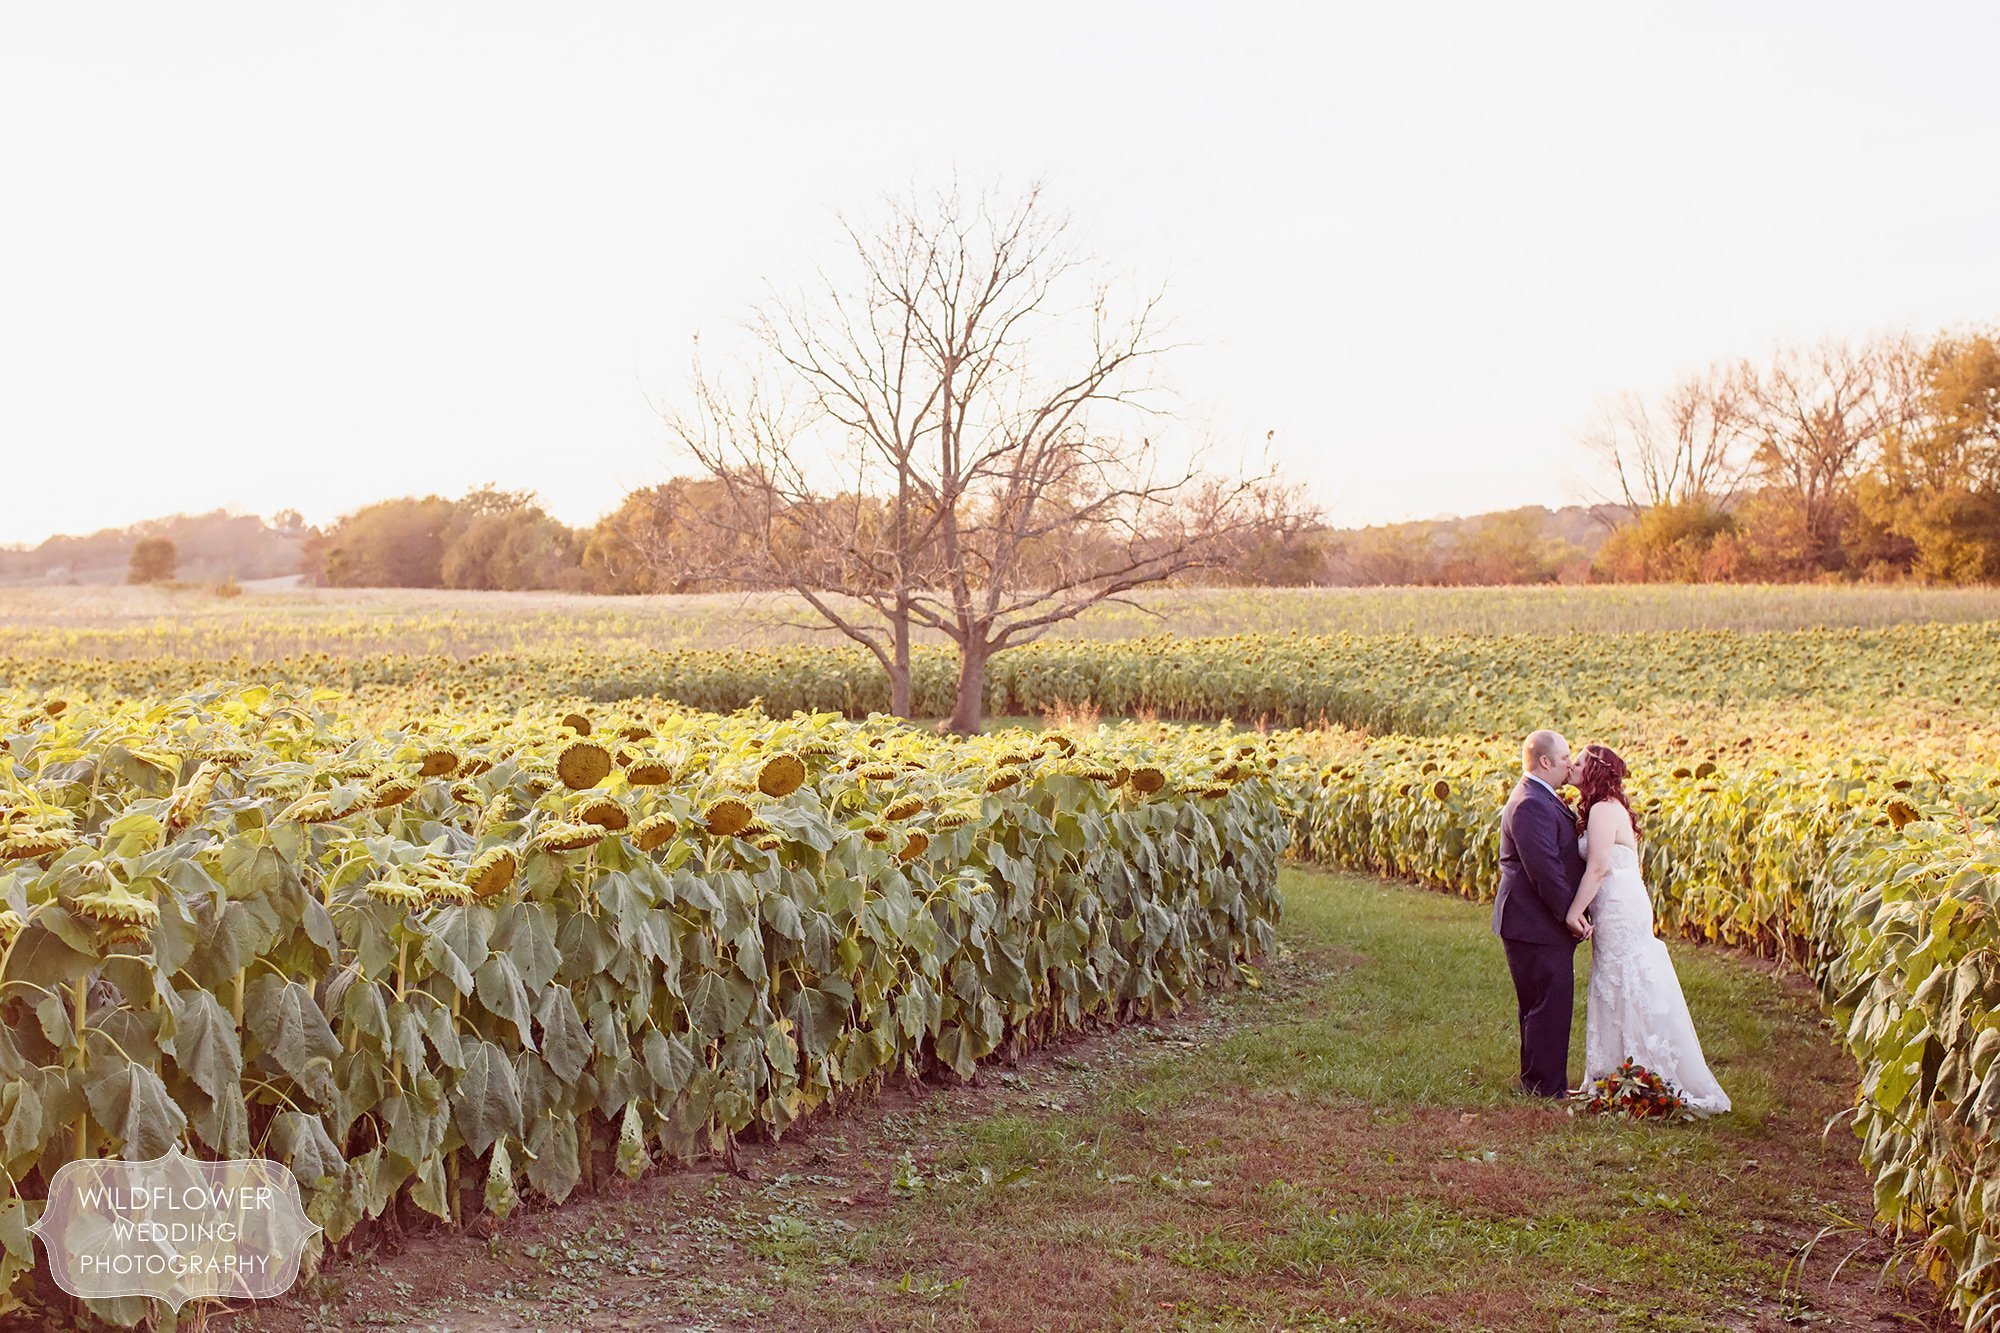 Anthropologie style wedding photography of bride and groom kissing in a field of sunflowers in October at the Schwinn Produce Farm.